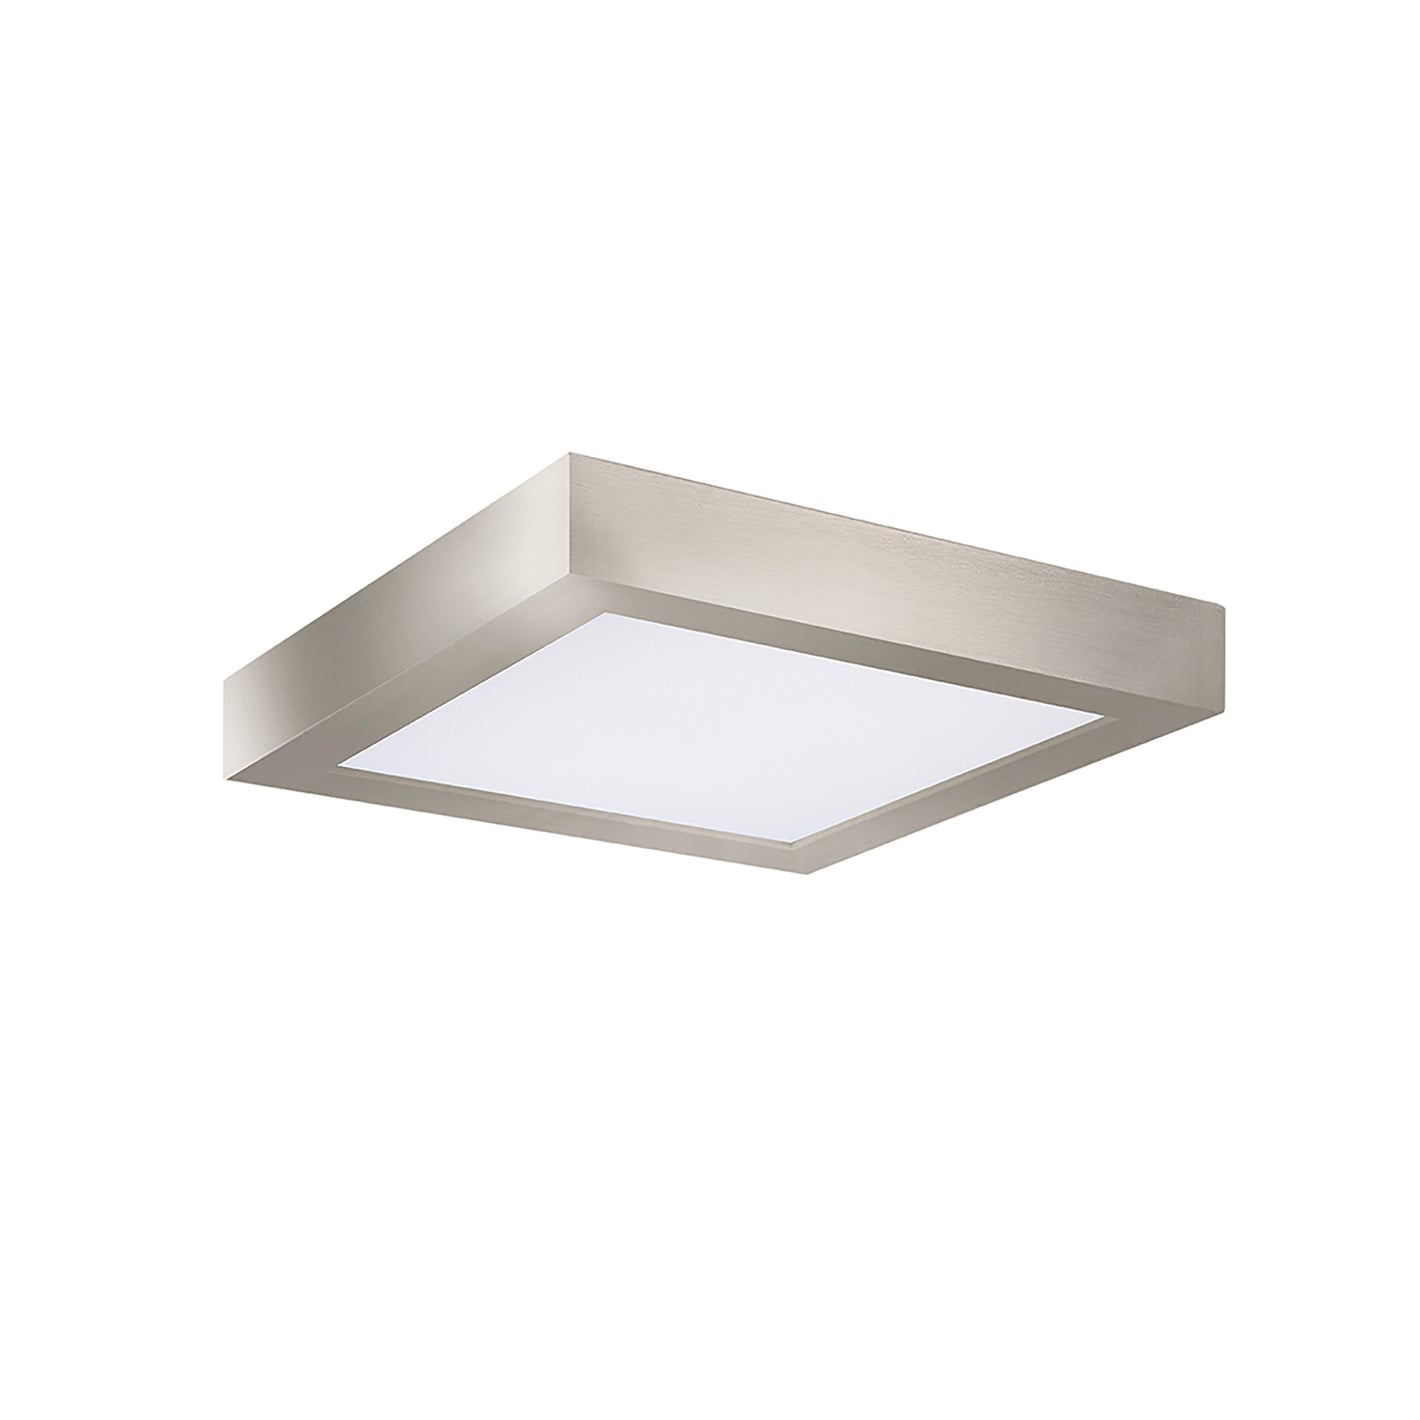 7 Inch Square 5CCT Color Selectable Surface Mount Panel Light Fixture, Brush Nickel Finish